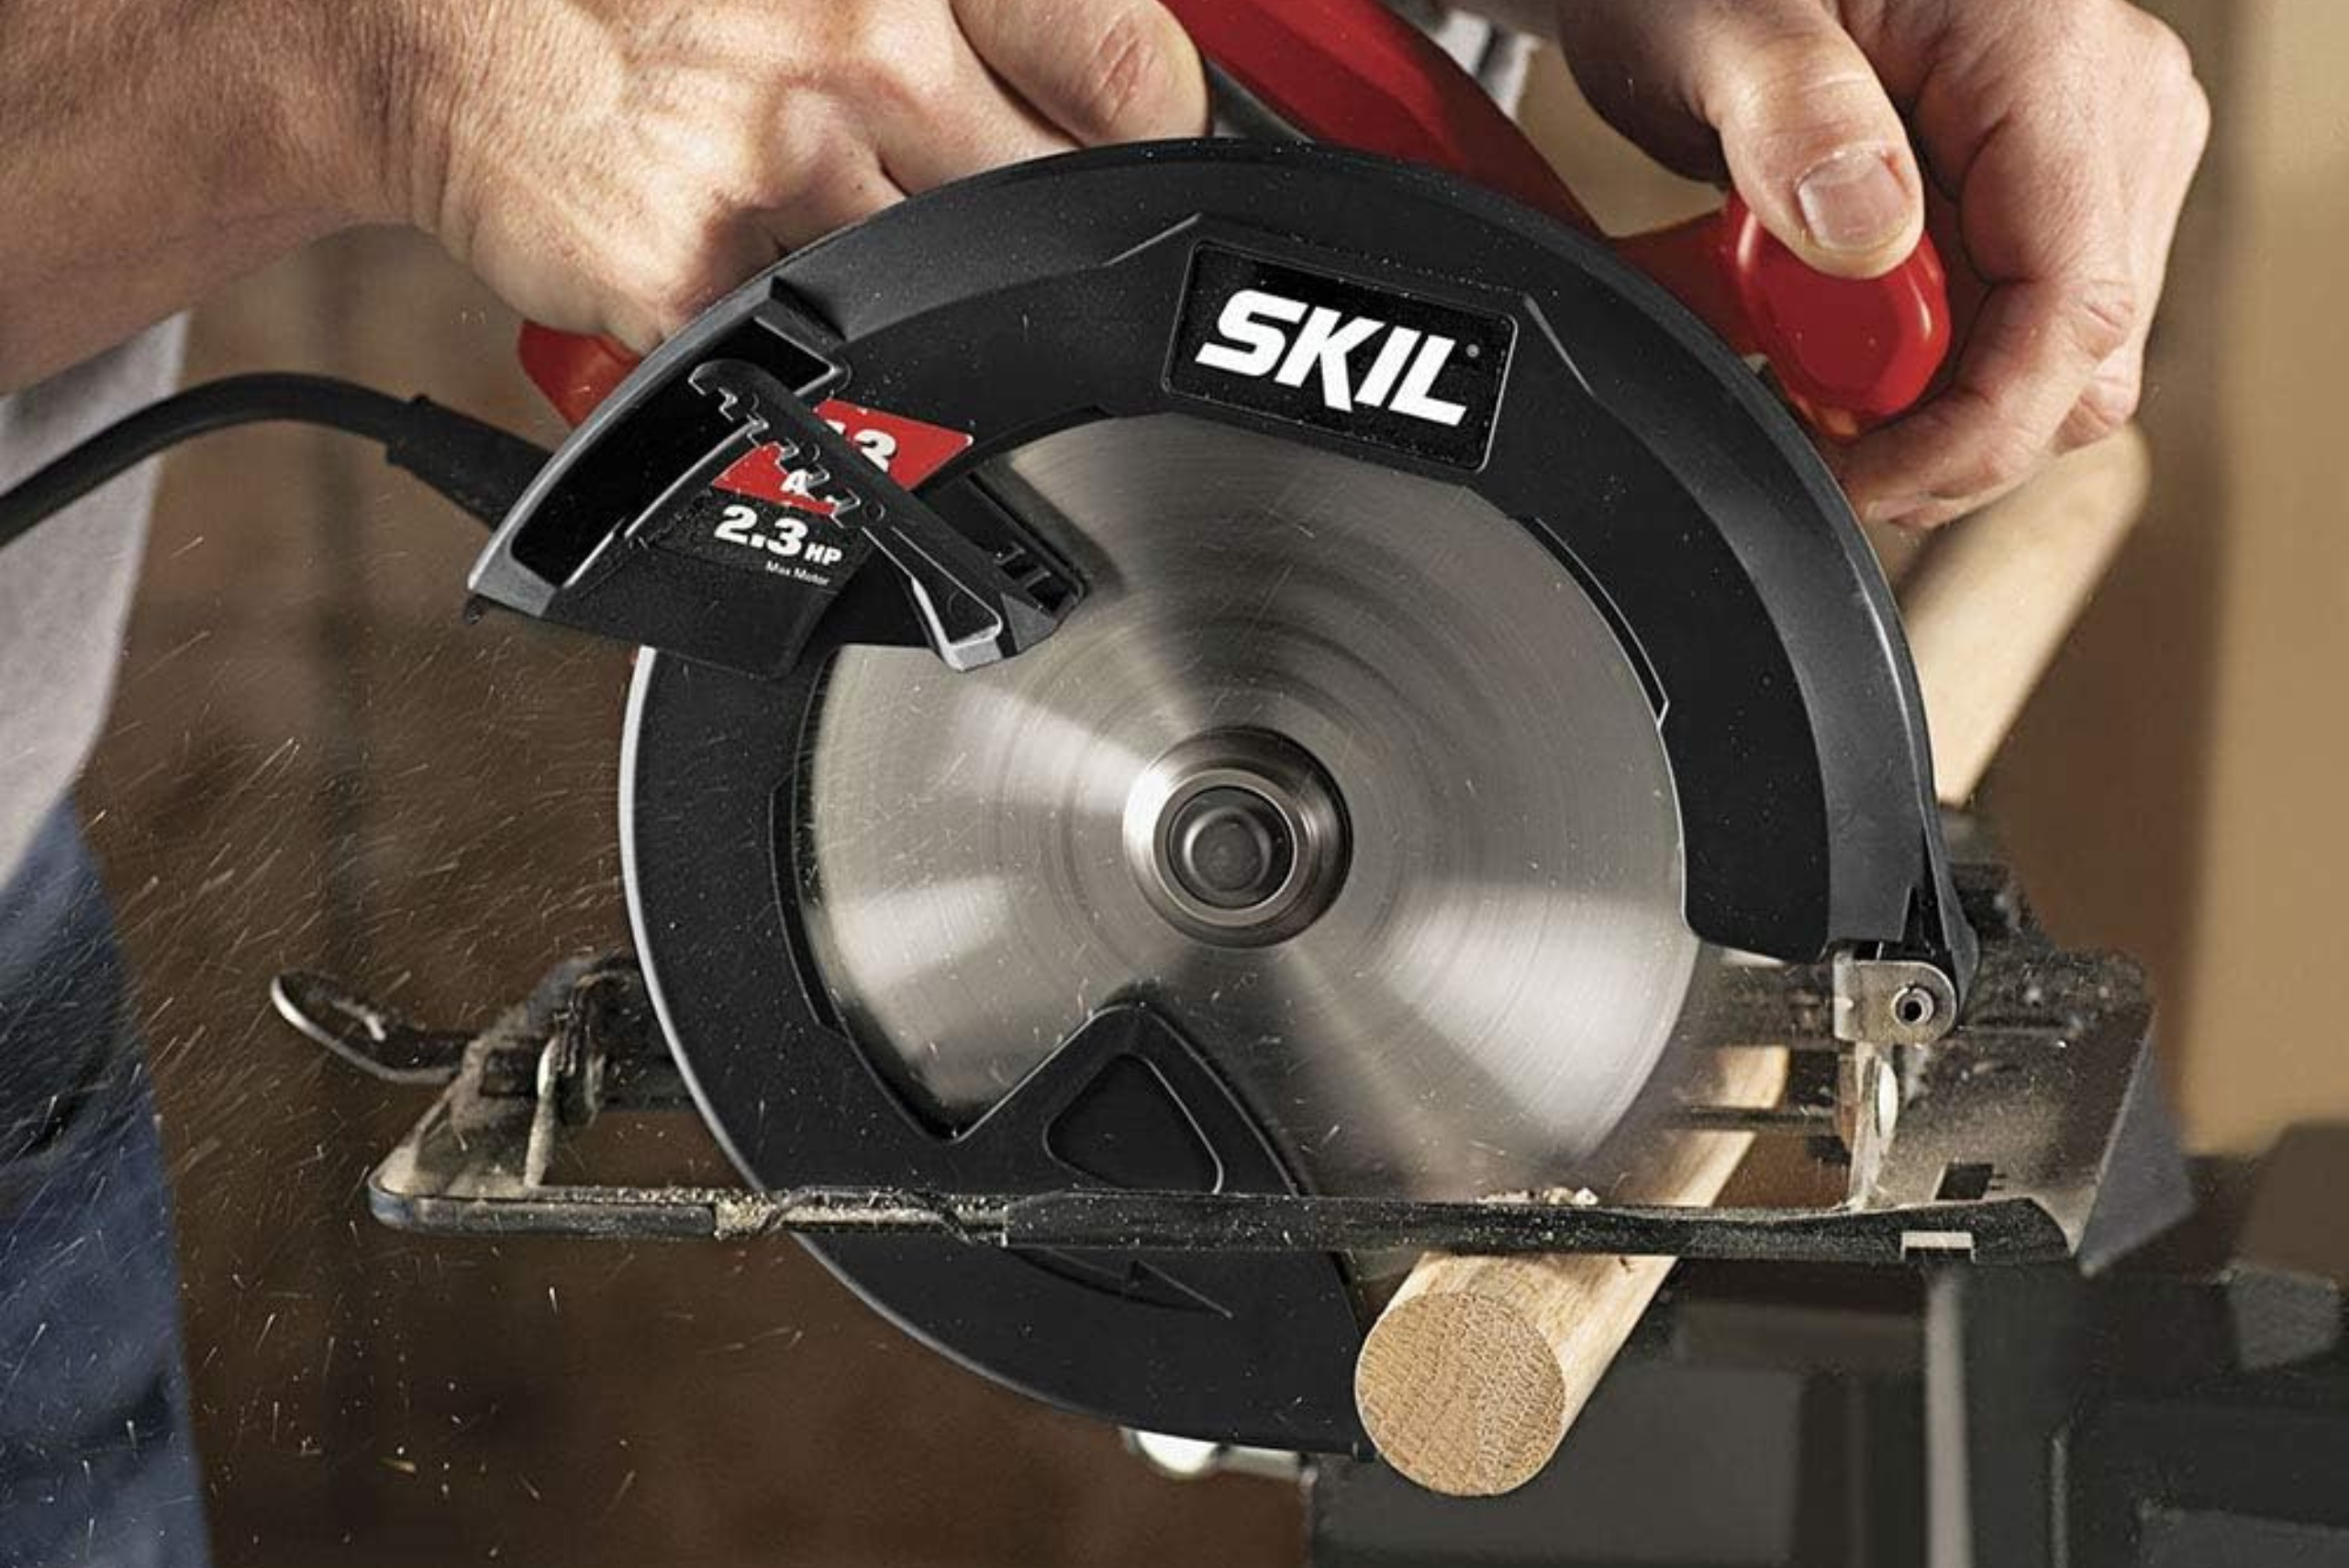 Circular saw cutting a wood piece that's secure in vise.